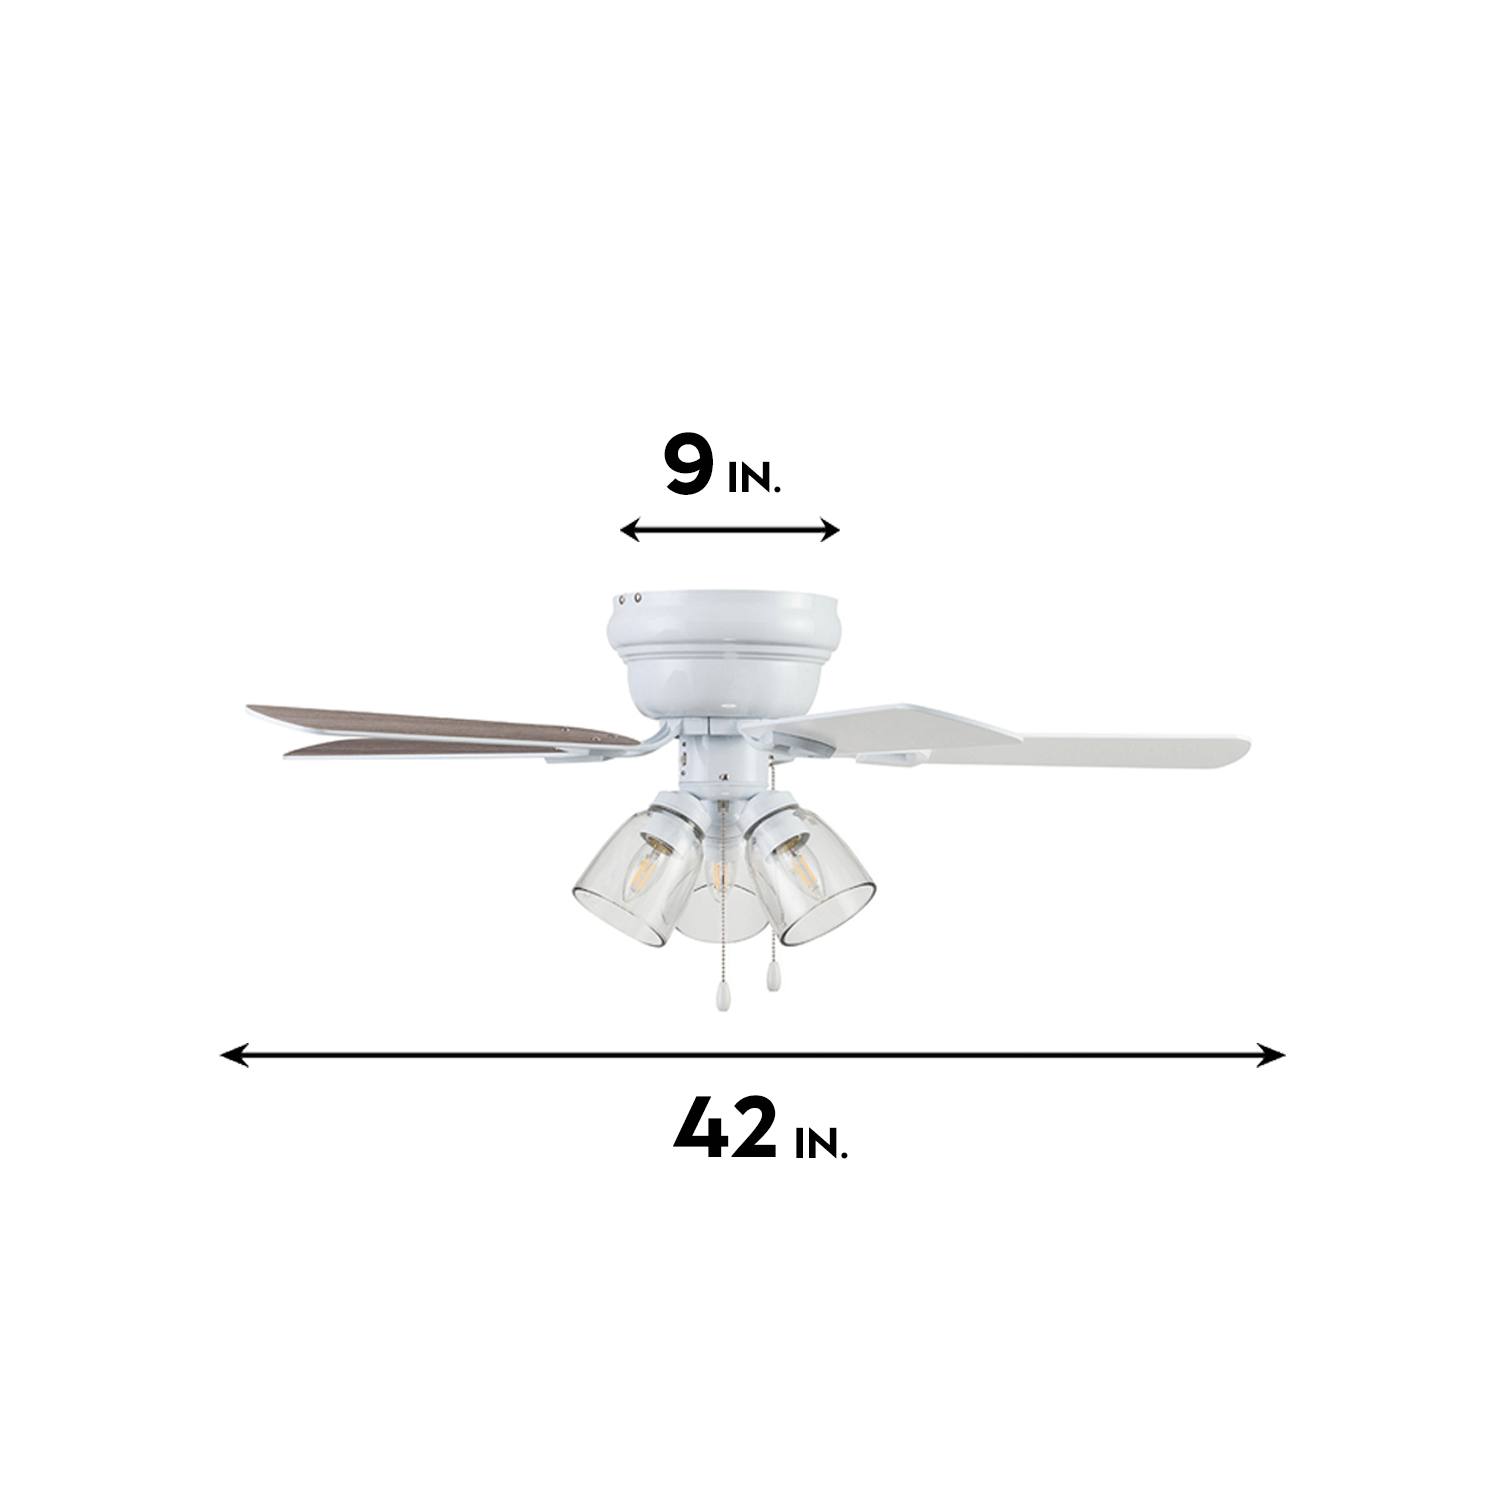 42 Inch Renton, White, Pull Chain, Ceiling Fan by Prominence Home